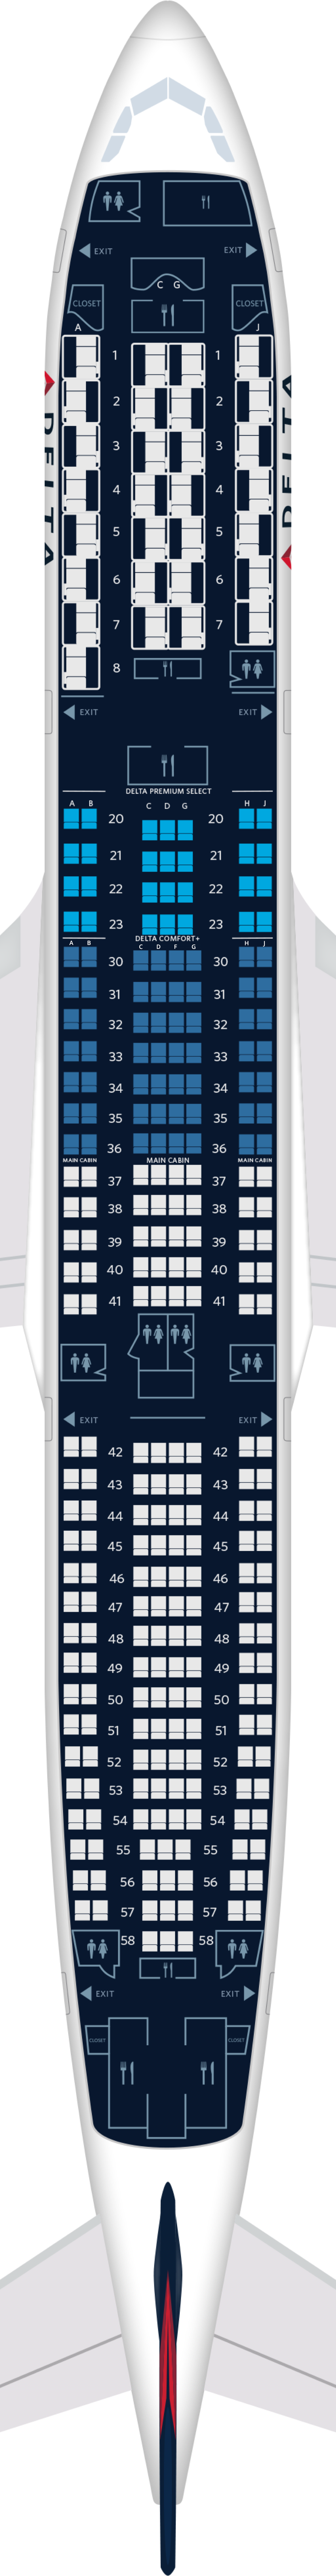 Seat Map Airbus A330 900neo - Image to u